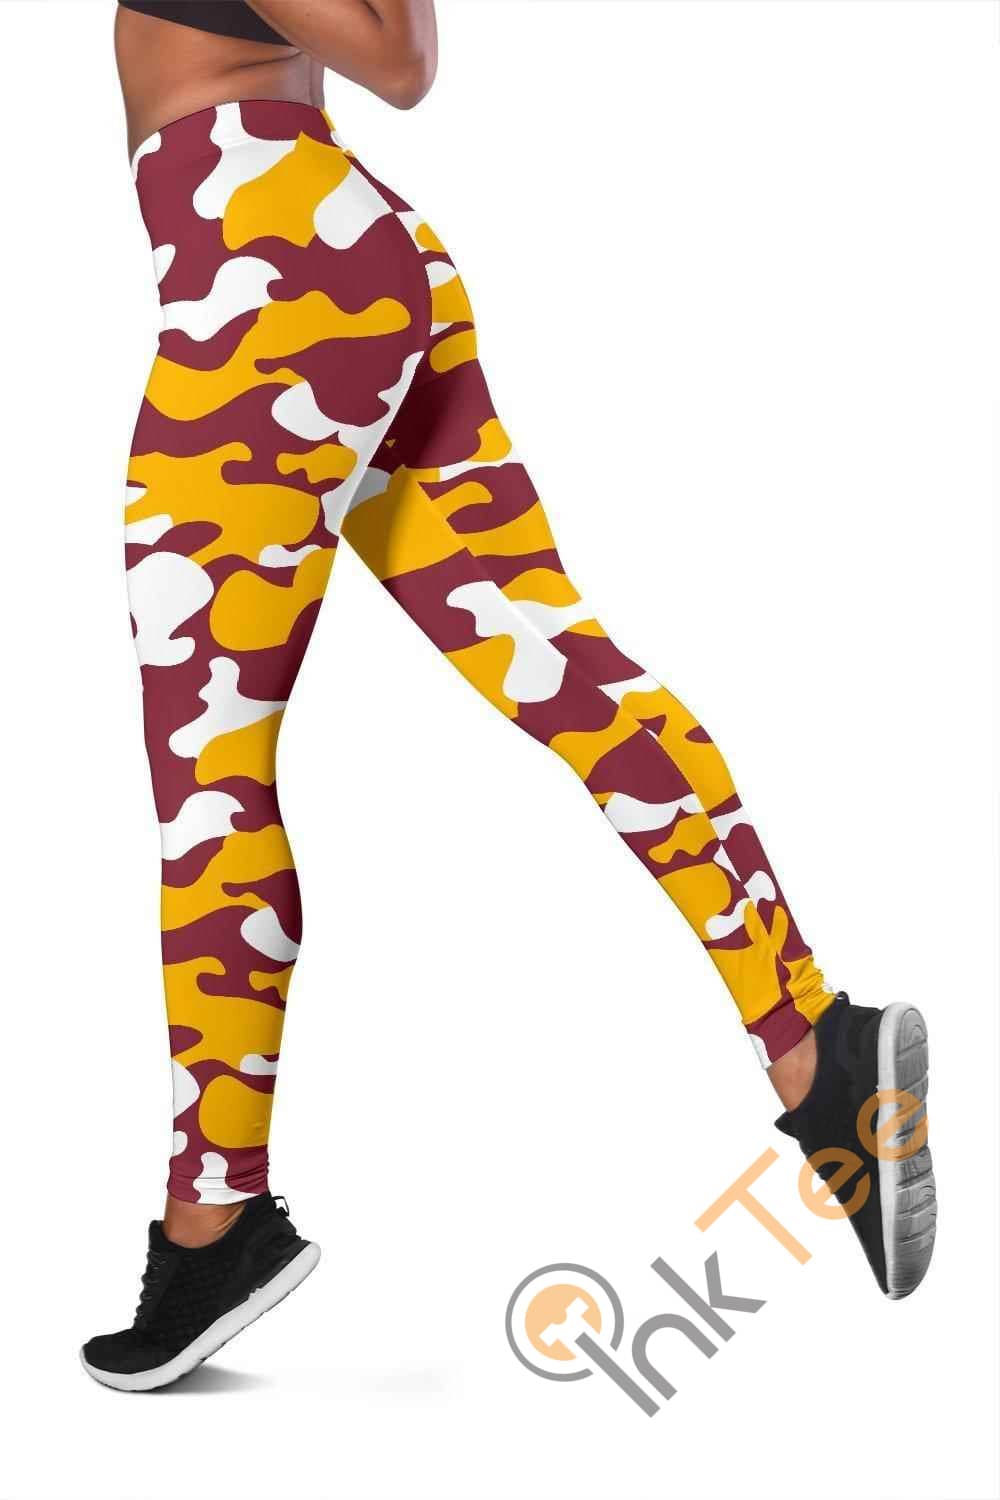 Inktee Store - Washington Redskins Inspired Tru Camo 3D All Over Print For Yoga Fitness Fashion Women'S Leggings Image